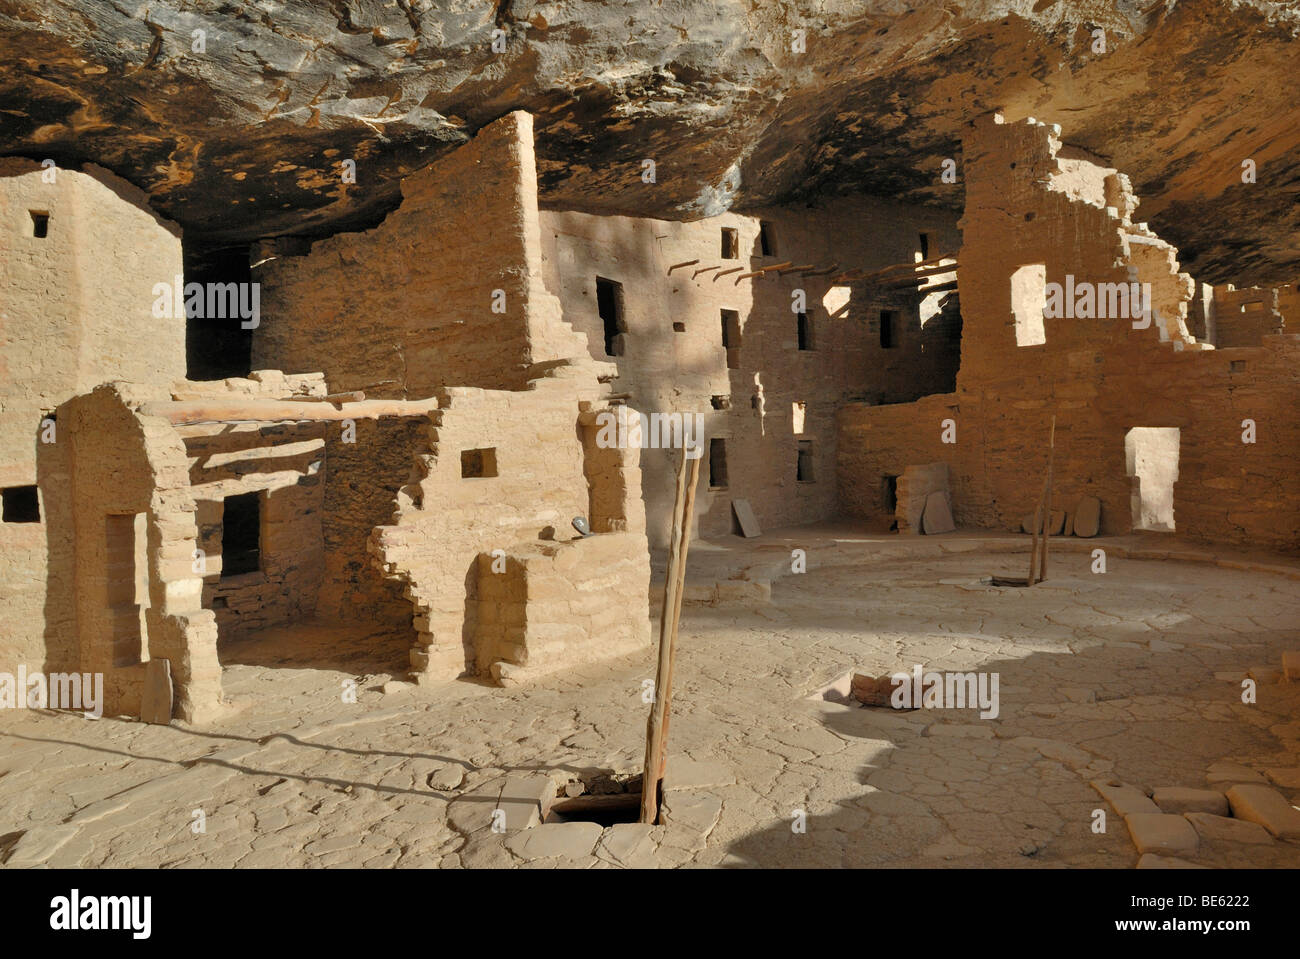 Historic habitation and cult site of the Ancestral Puebloans, Spruce Tree House, detail, in evening light, about 1200 AD, Mesa  Stock Photo